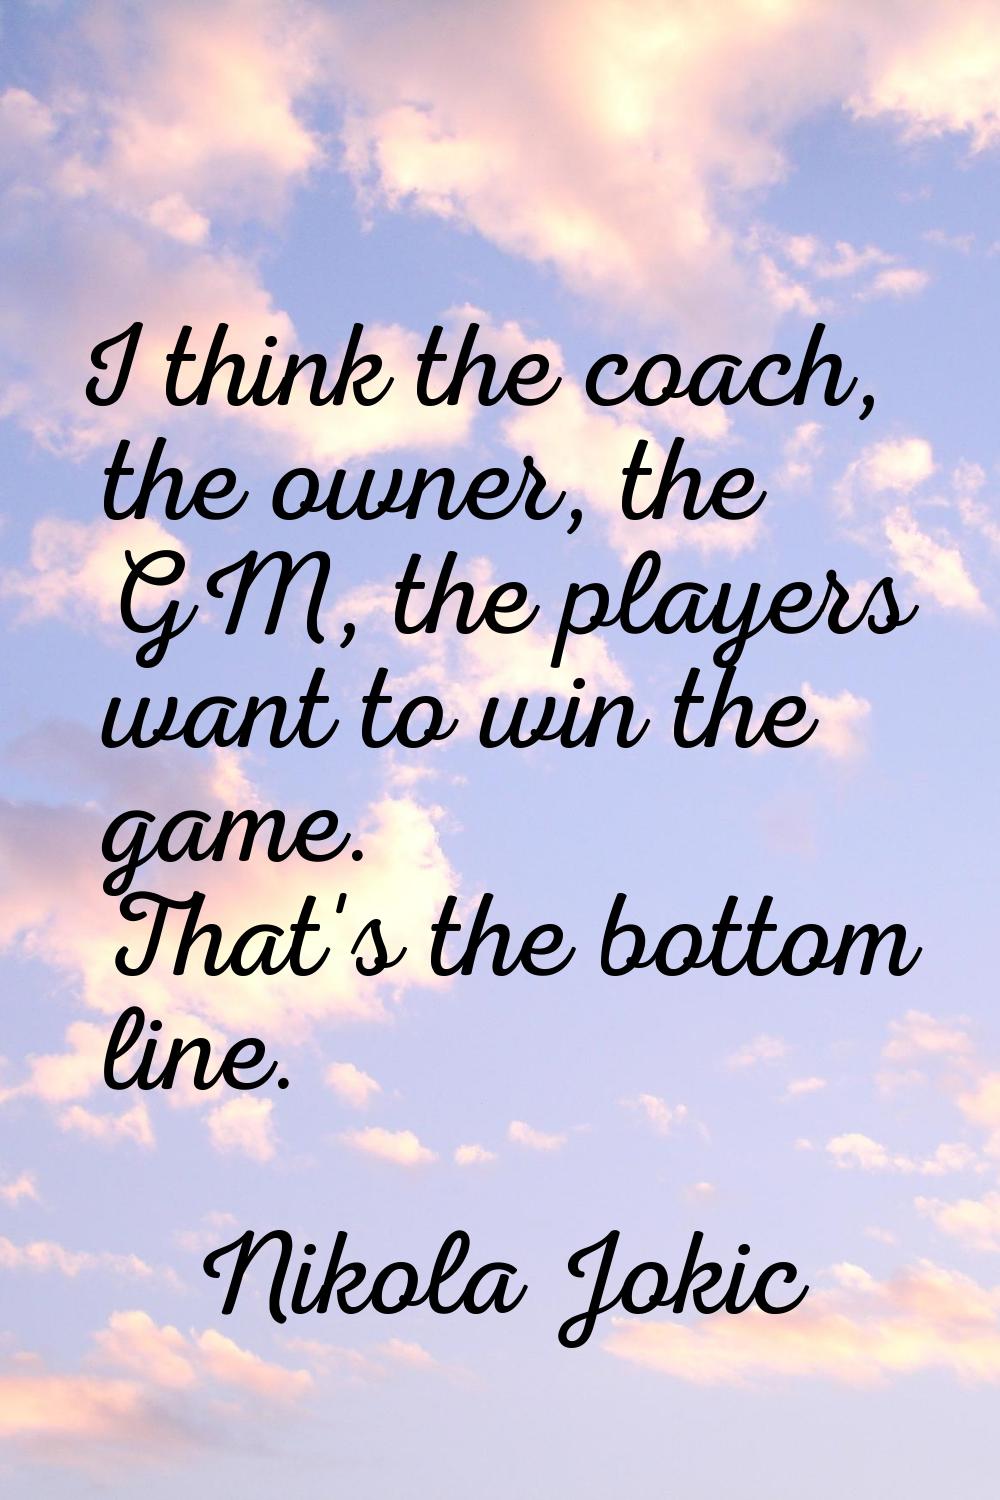 I think the coach, the owner, the GM, the players want to win the game. That's the bottom line.